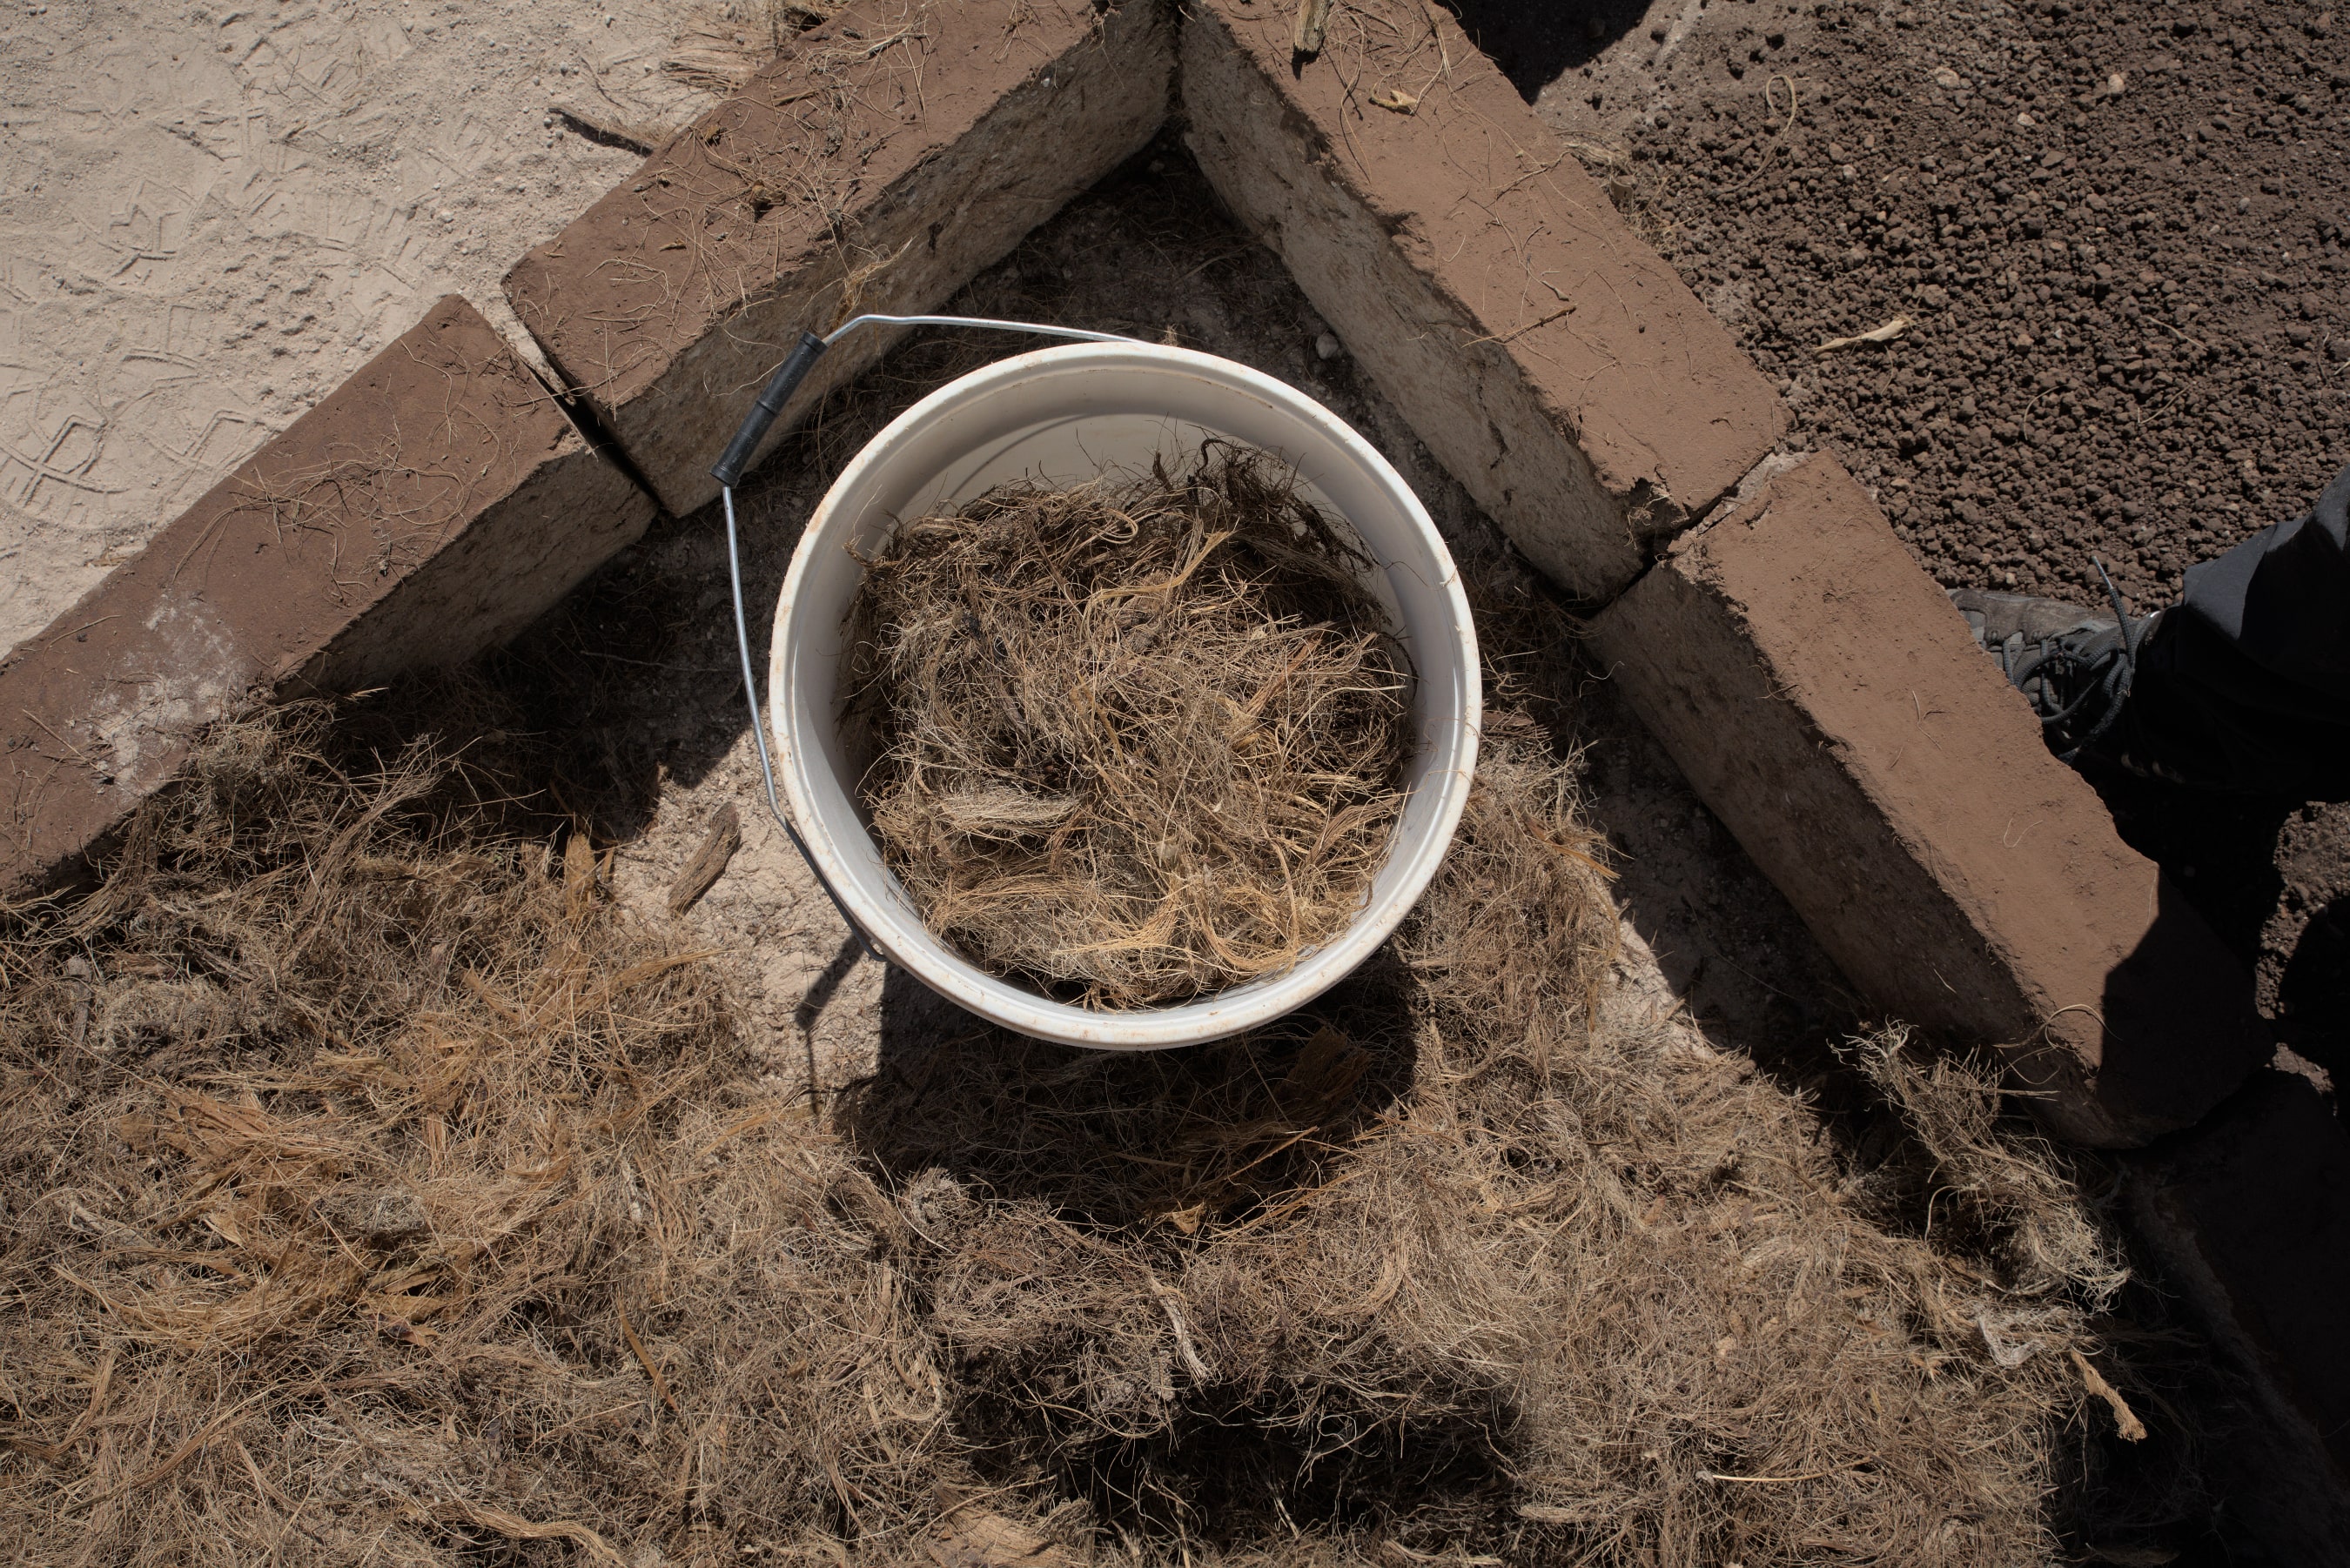 The crushed agave fibers, or bagazo, from the distillation of Astral Tequila are upcycled and combined with other raw materials to create adobe bricks, which are then used to build homes in Mexico.